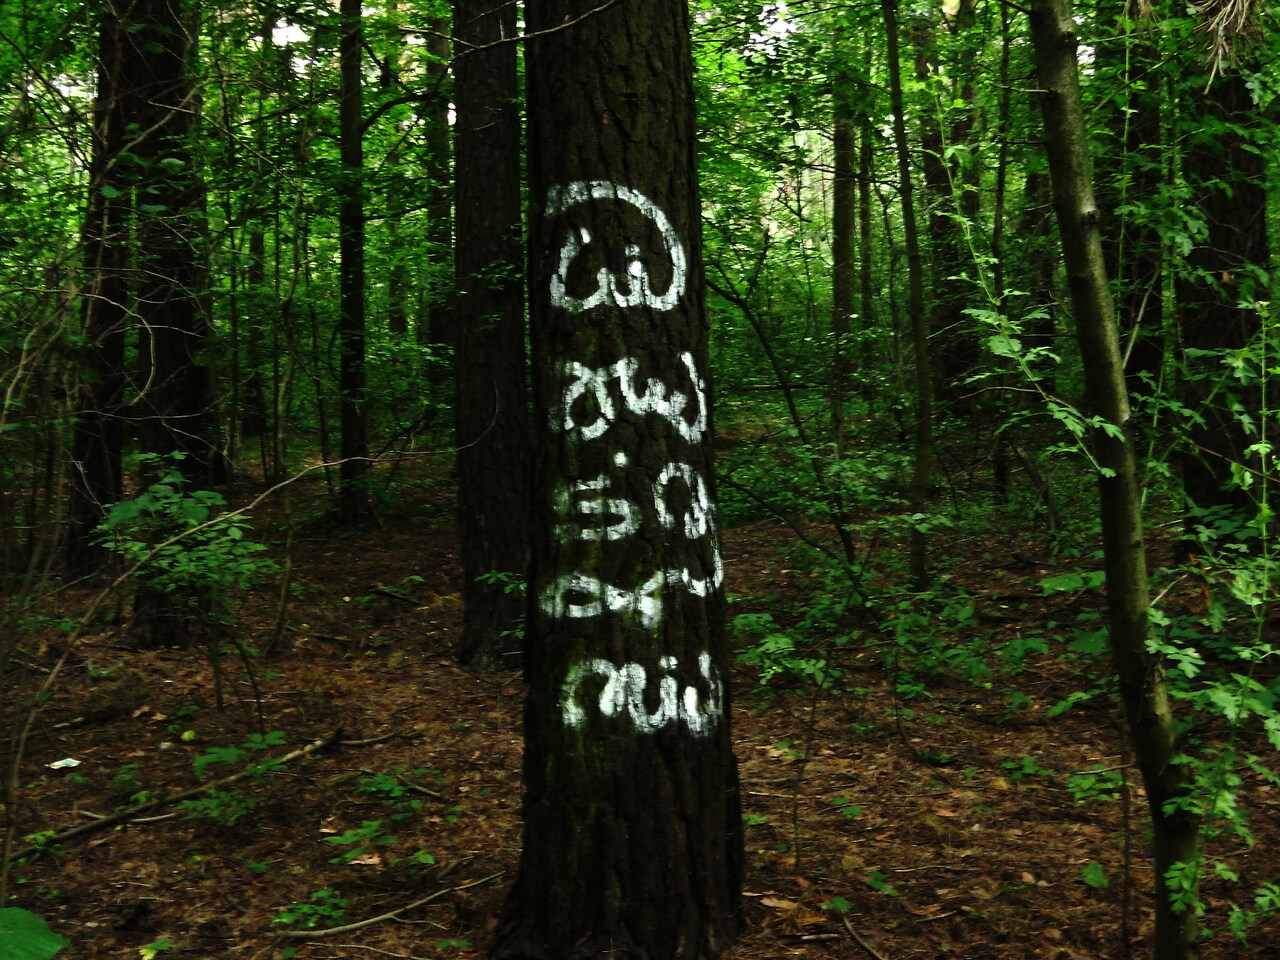 Tae Ateh. Asemic Intervention in the Forest. Workshop documentation. - Tae Ateh  - provided by the author......